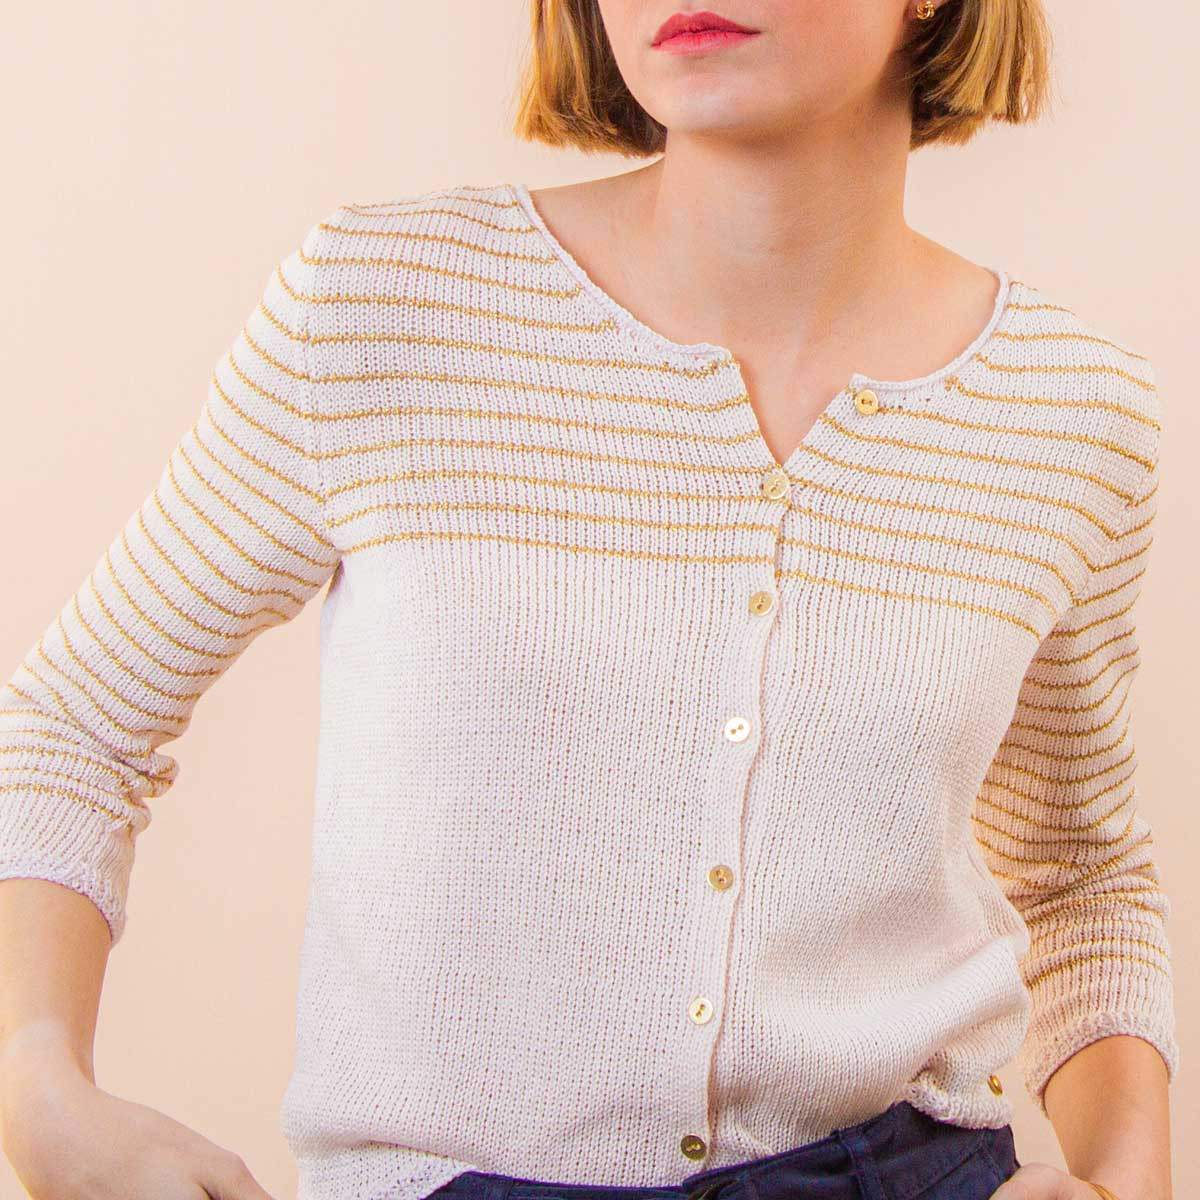 Dormelle Cardigan to knit